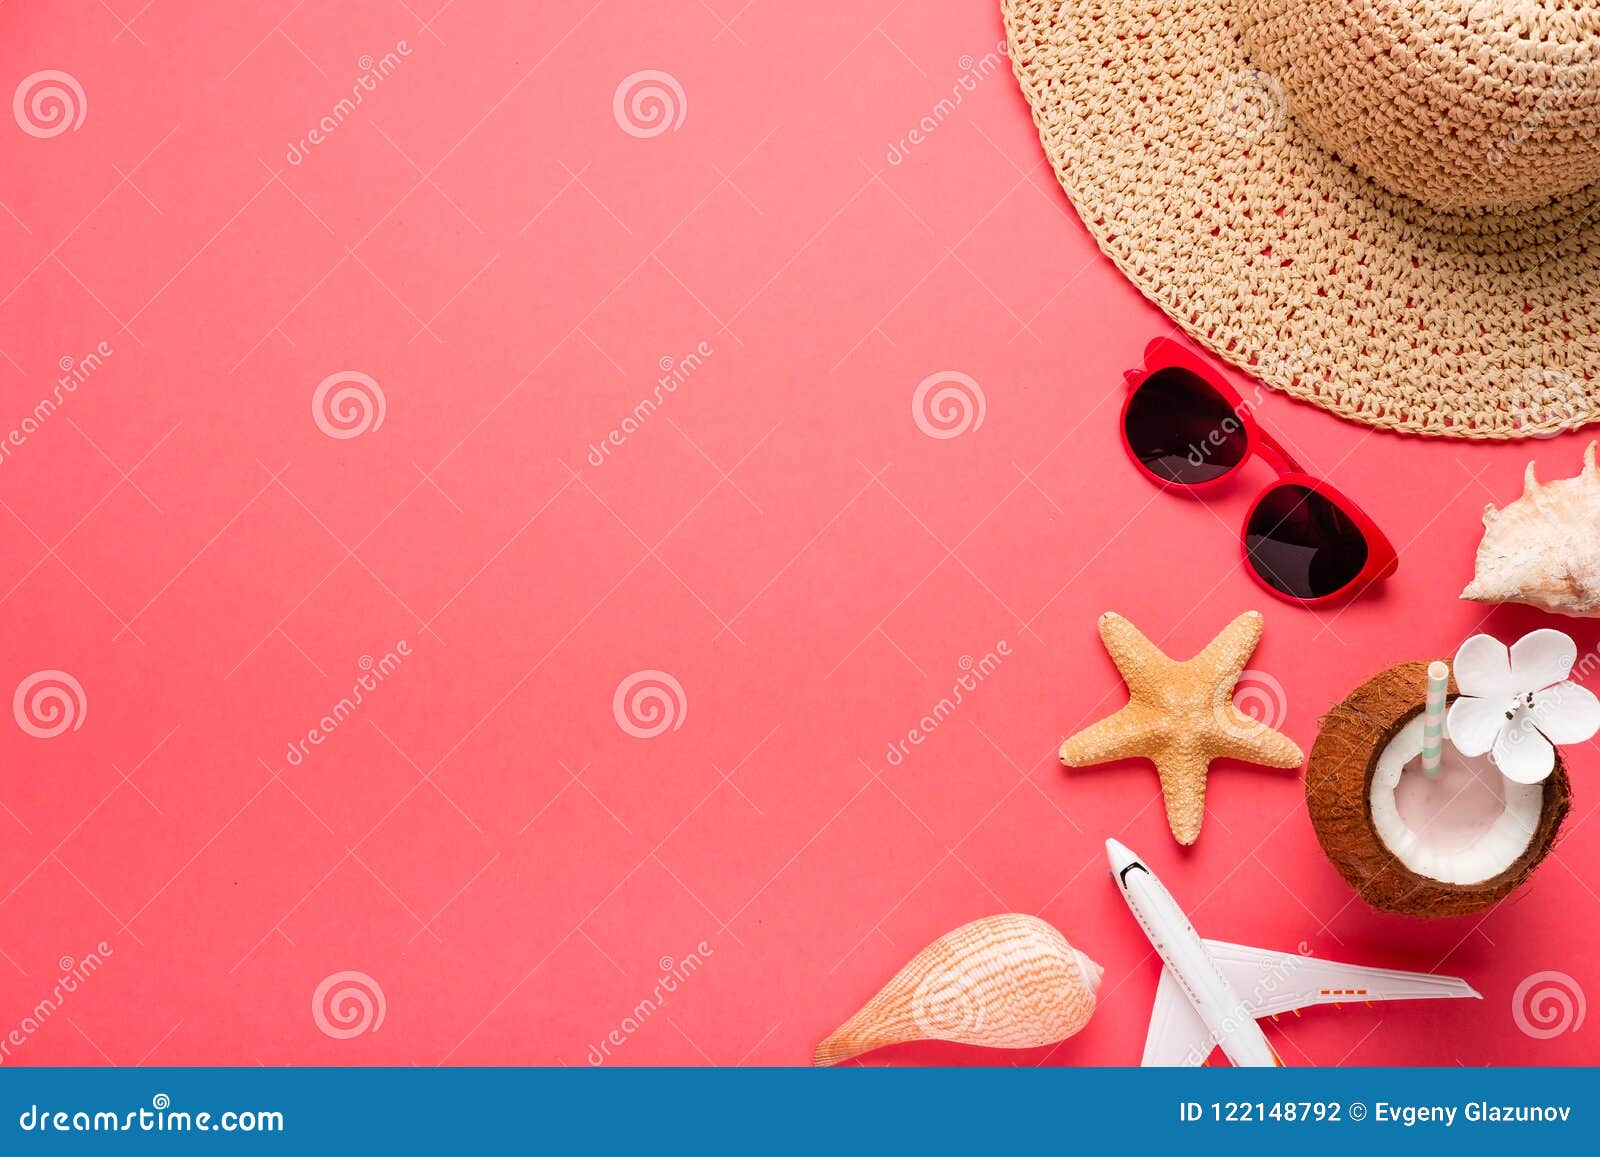 Traveler Accessories on Trendy Pink Background. Bright Summer Color ...